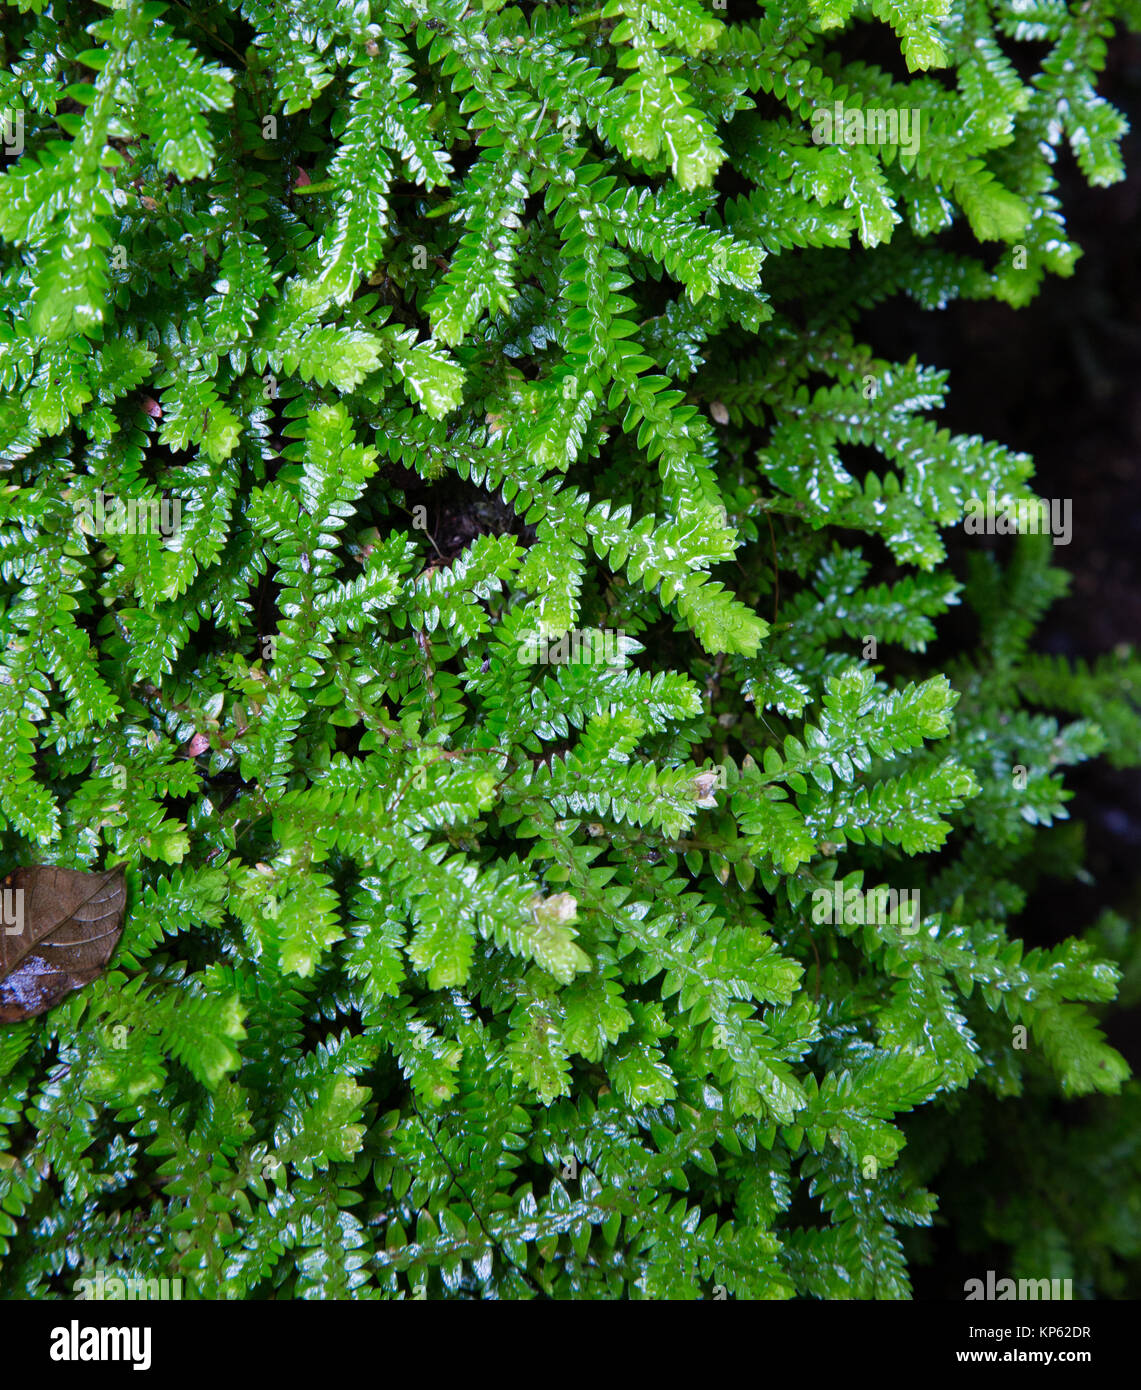 Lush growth of plagiothecum moss growing in wet tropical forest near Arenal in Costa Rica Stock Photo